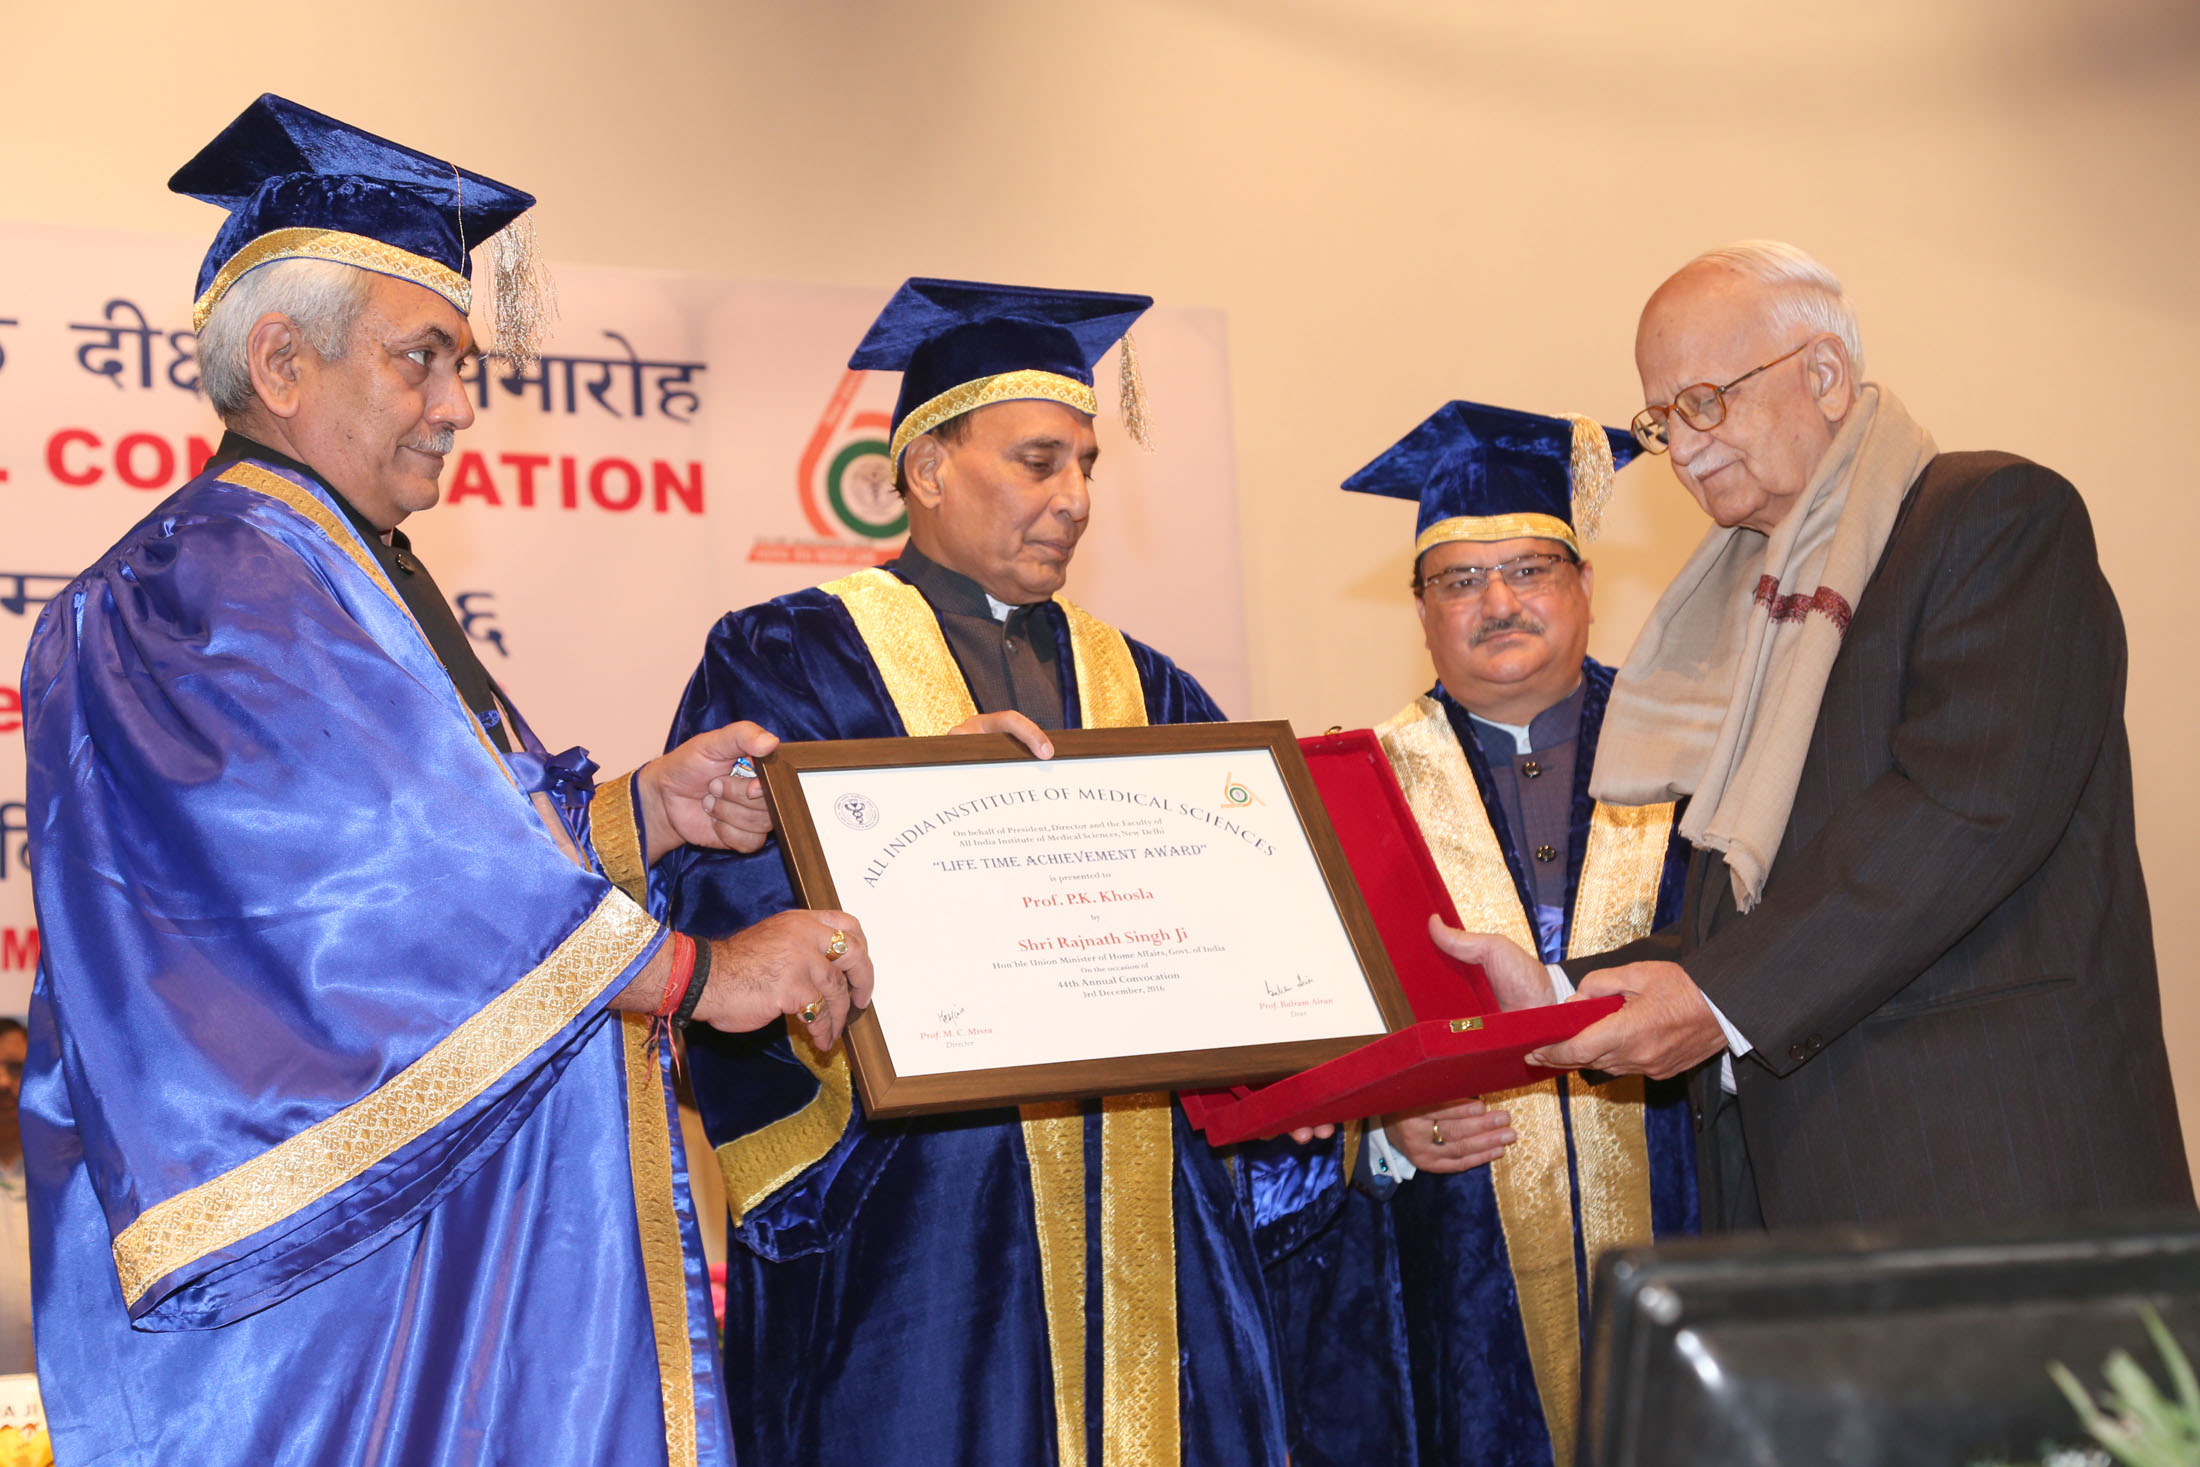 The Union Home Minister, Shri Rajnath Singh presenting the Lifetime Achievement Award to Prof. P.K. Khosla during the 44th Annual Convocation of the AIIMS, in New Delhi on December 03, 2016.